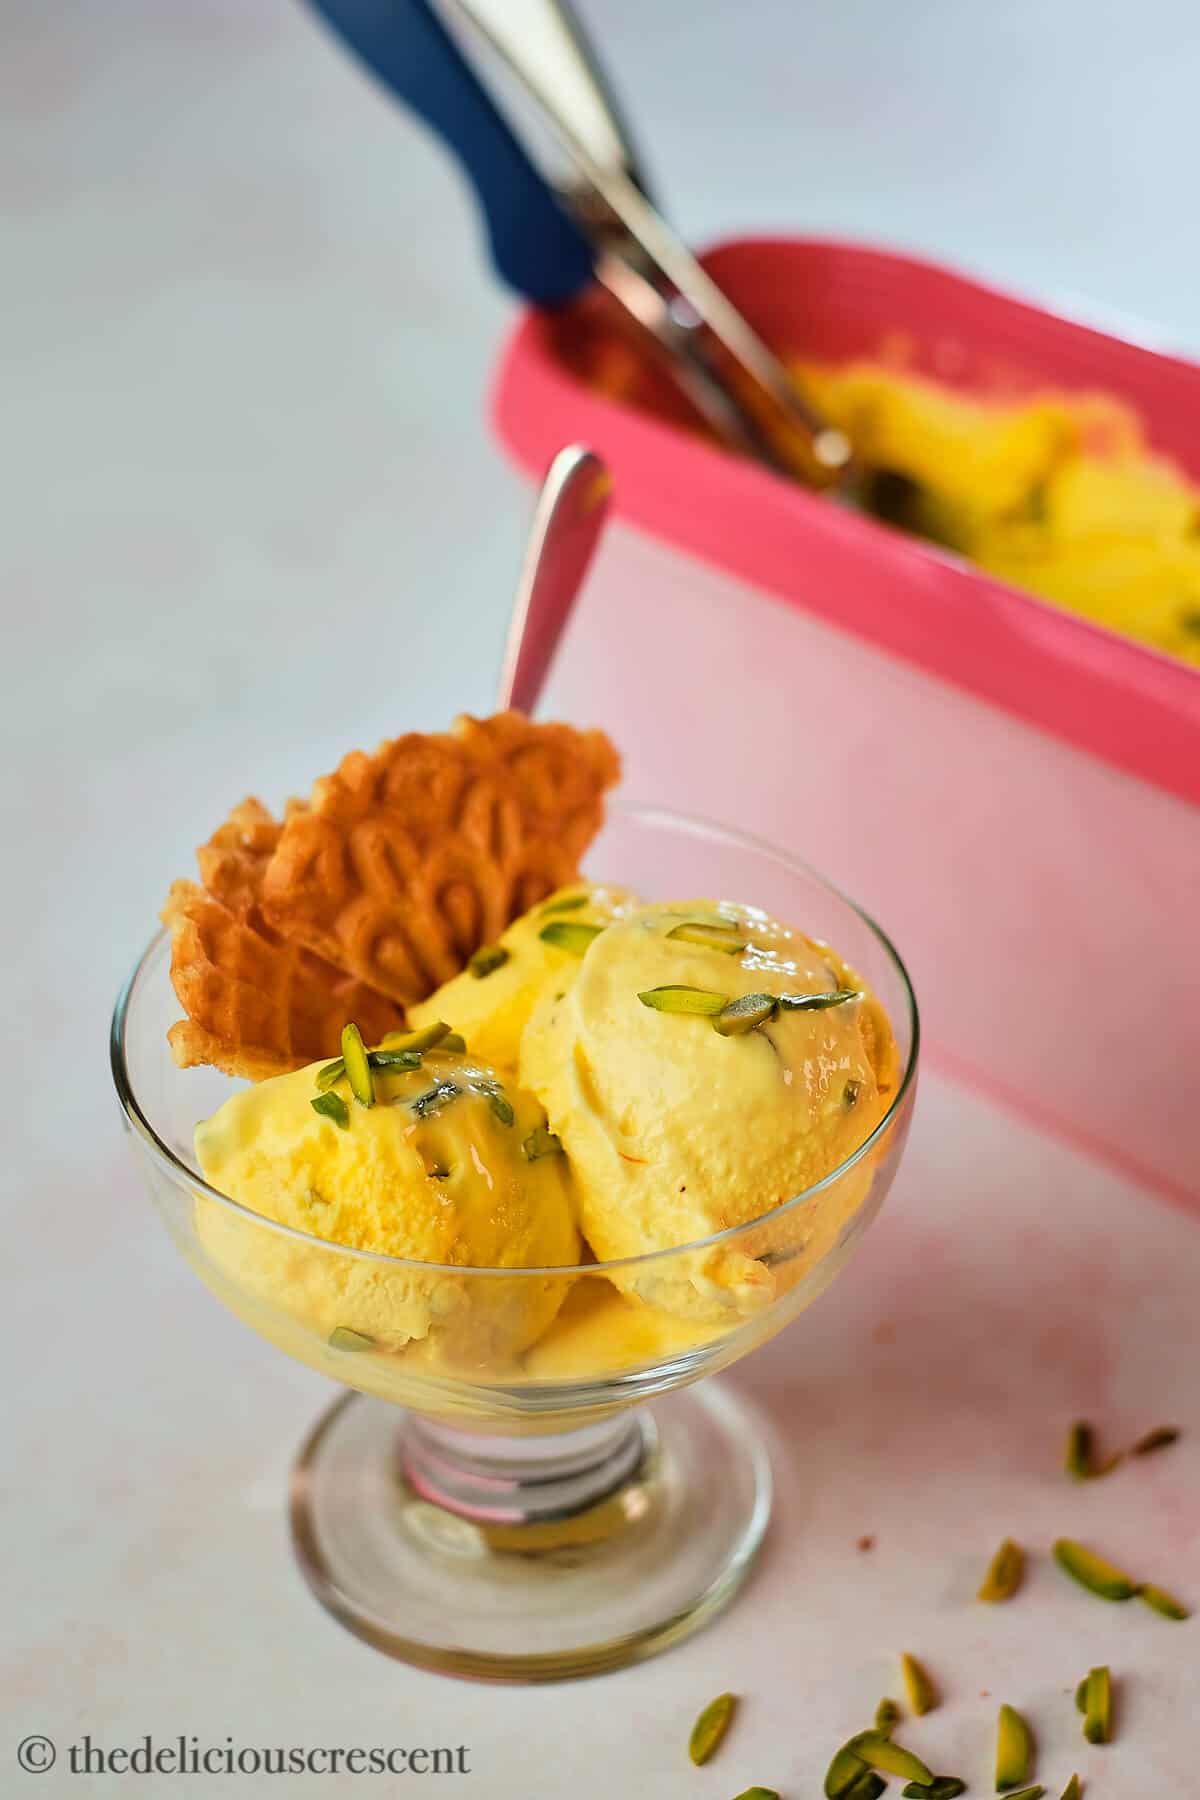 Scoops of Persian ice cream in a glass cup.